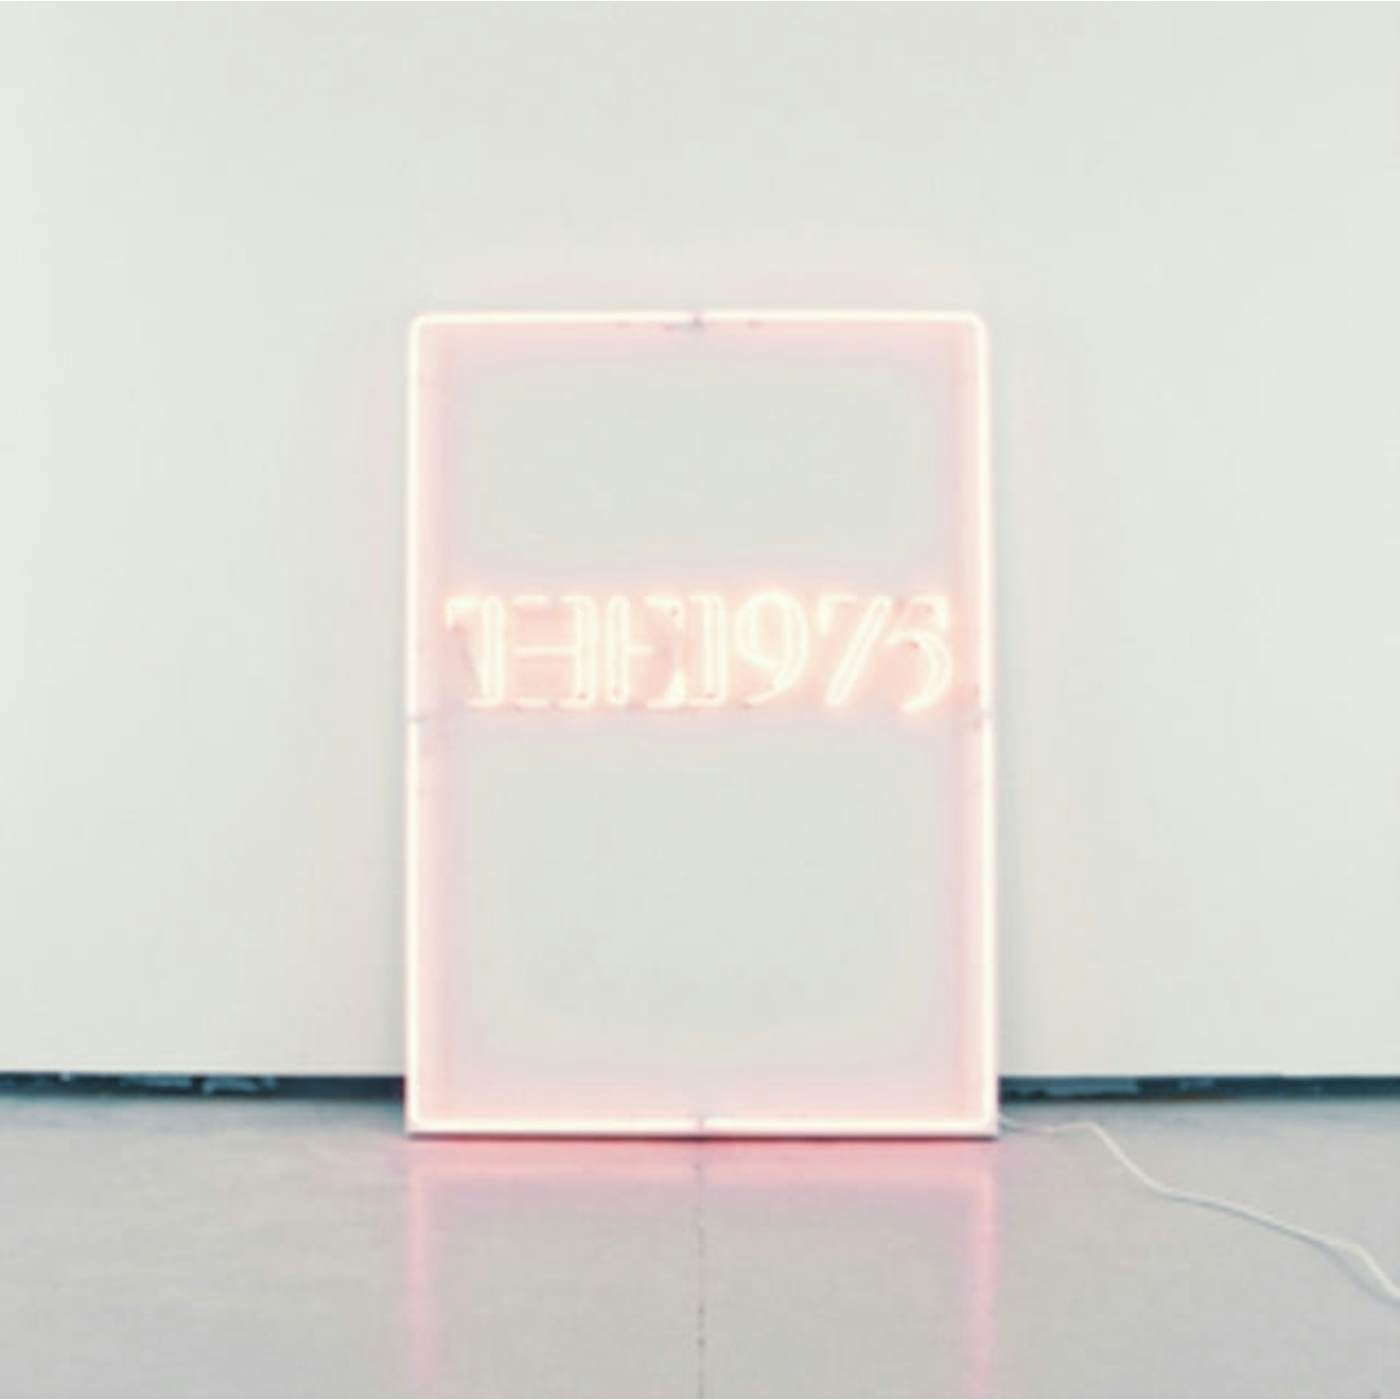 The 1975 LP Vinyl Record - I Like It When You Sleep / For You Are So Beautiful Yet So Unaware Of It